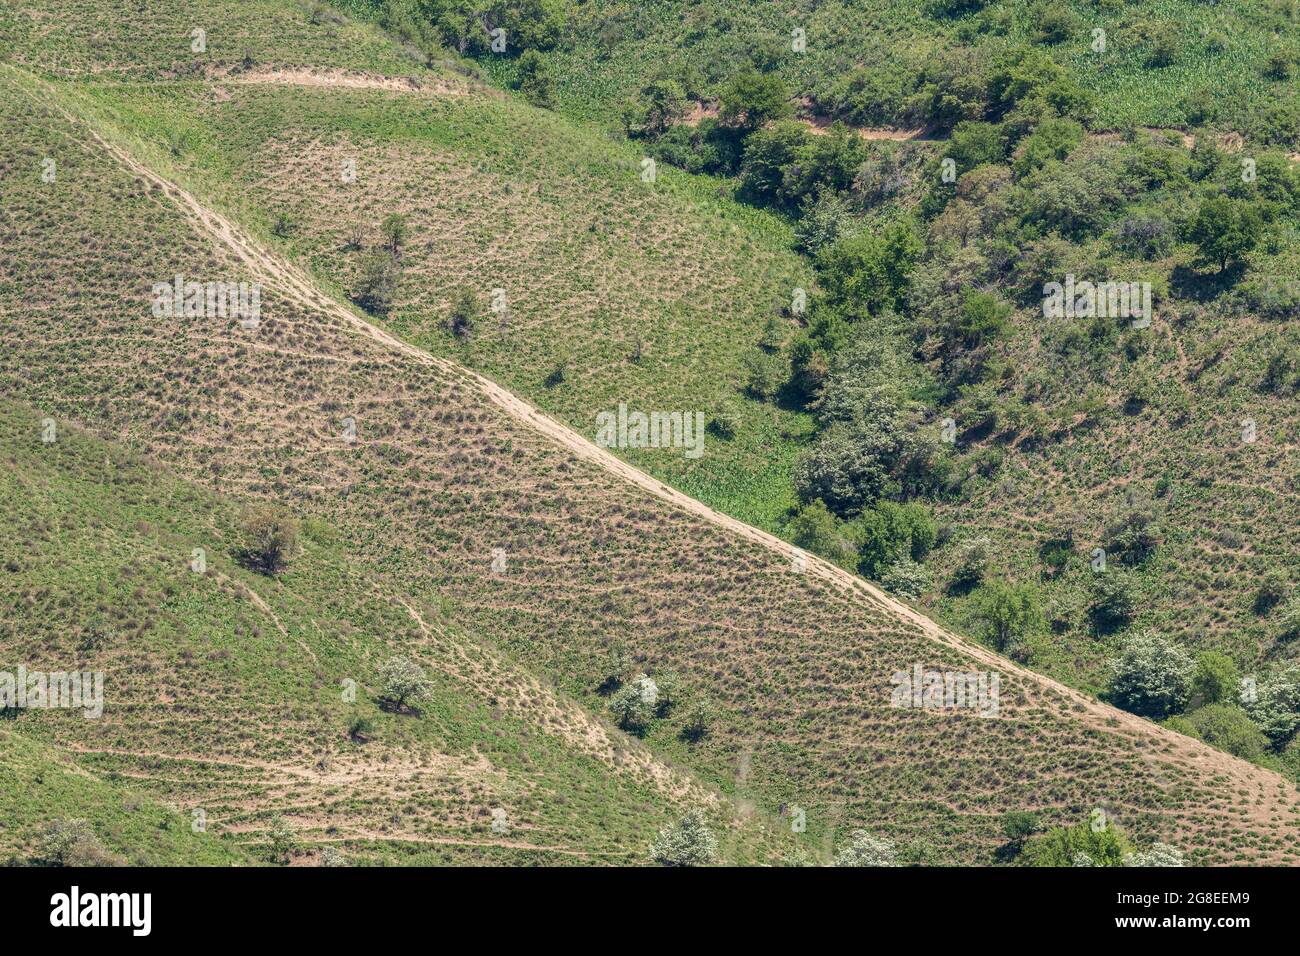 A well-trodden path on the side of a mountain hill among the vegetation. Horizontal direction from top to bottom Stock Photo